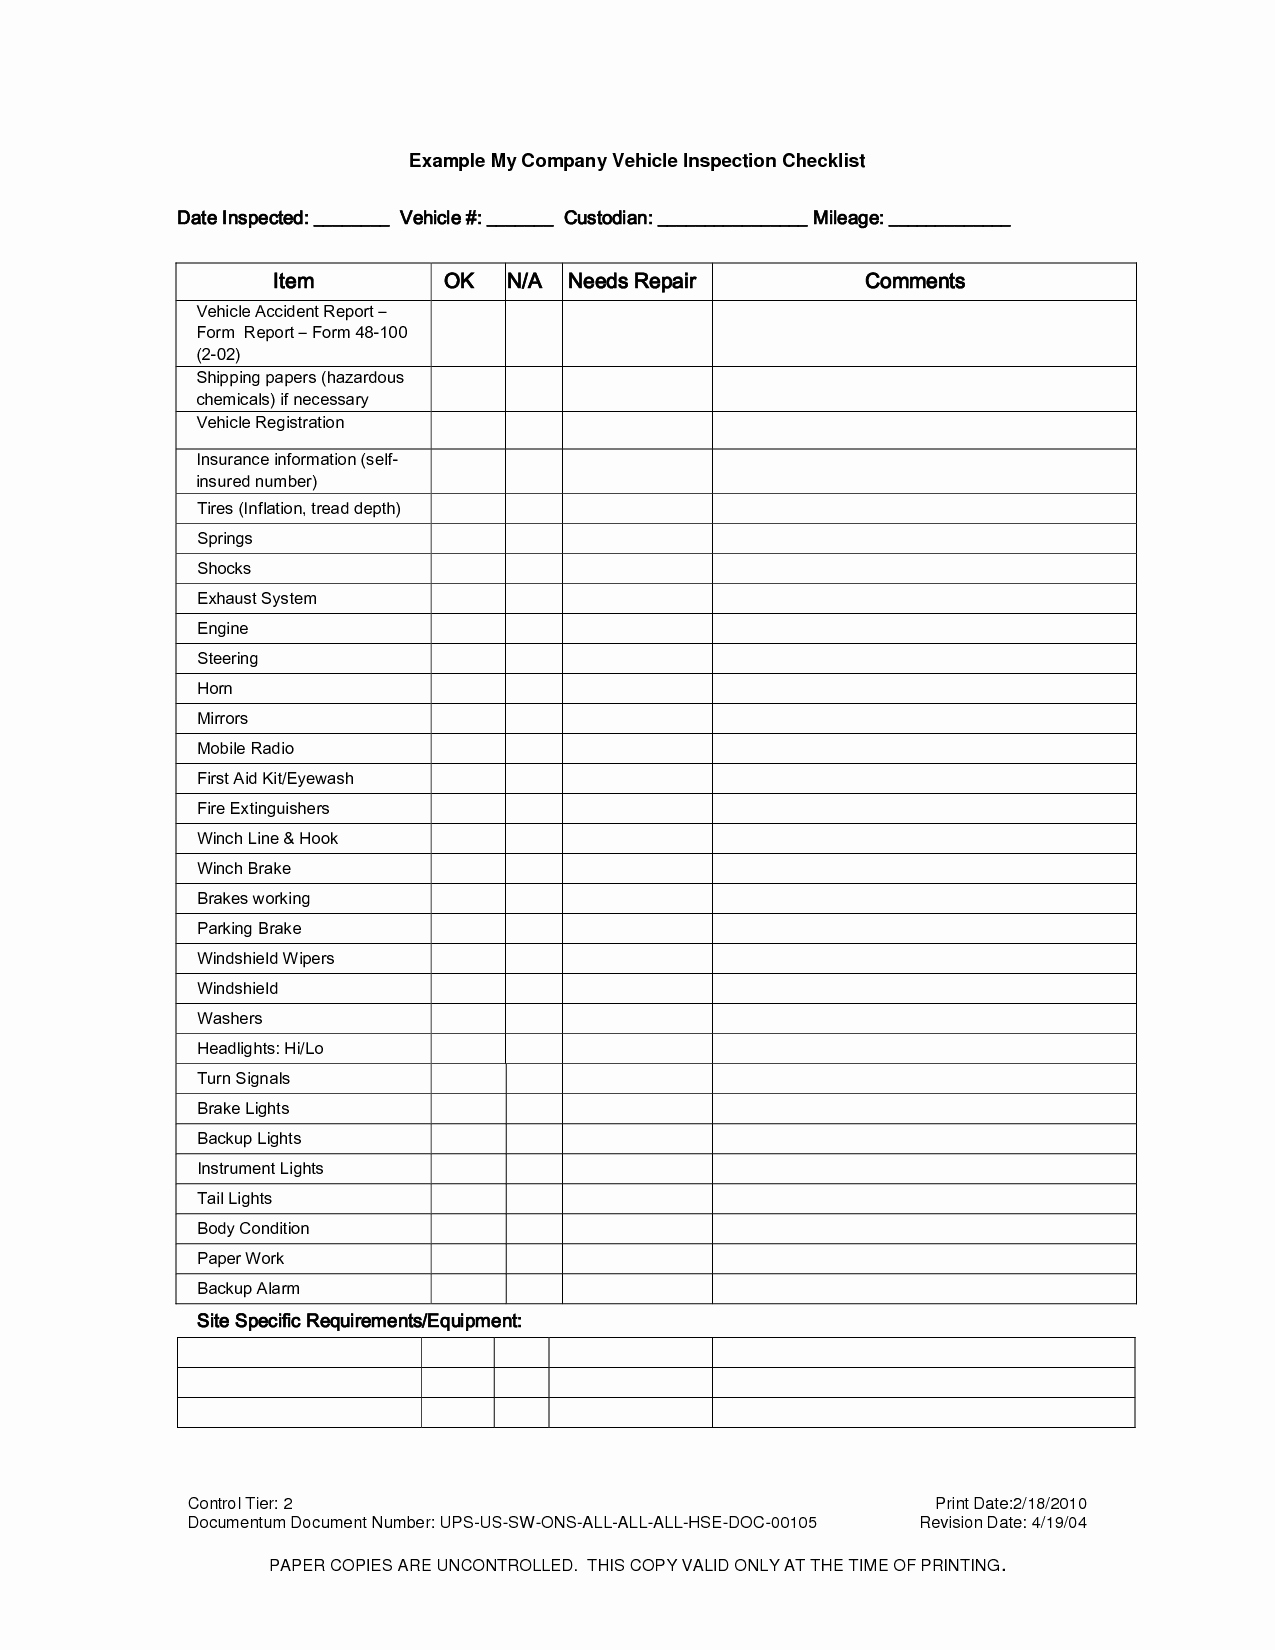 Daily Vehicle Inspection Checklist Template New Vehicle Inspection Checklist Template